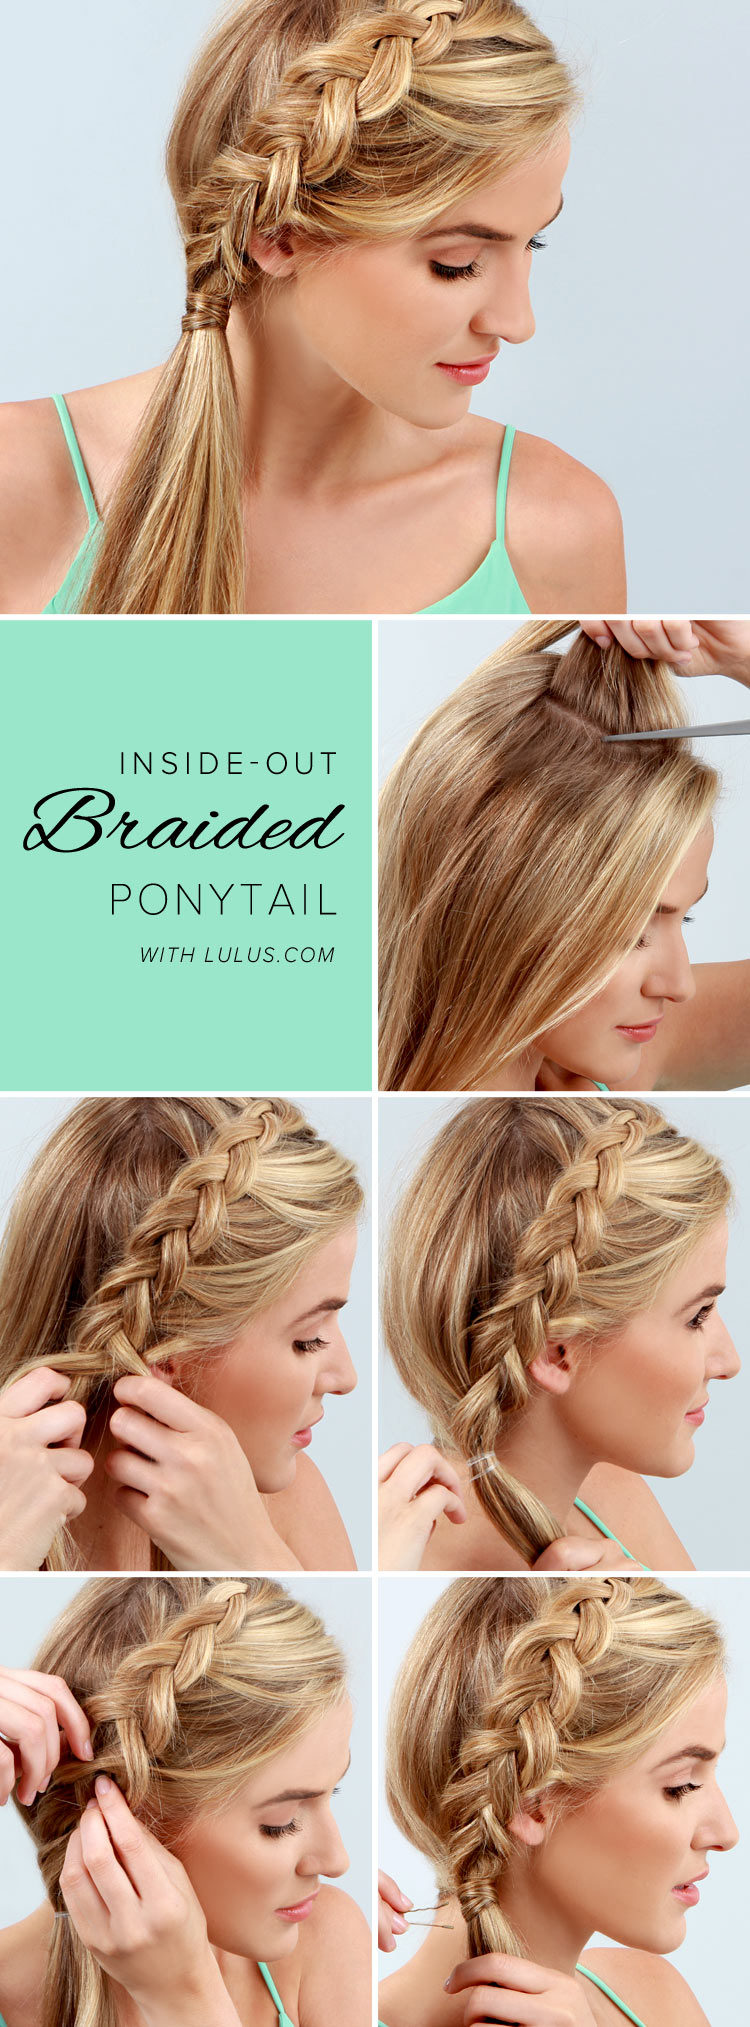 15 Stylish Step by Step Hairstyle Tutorials You Must See